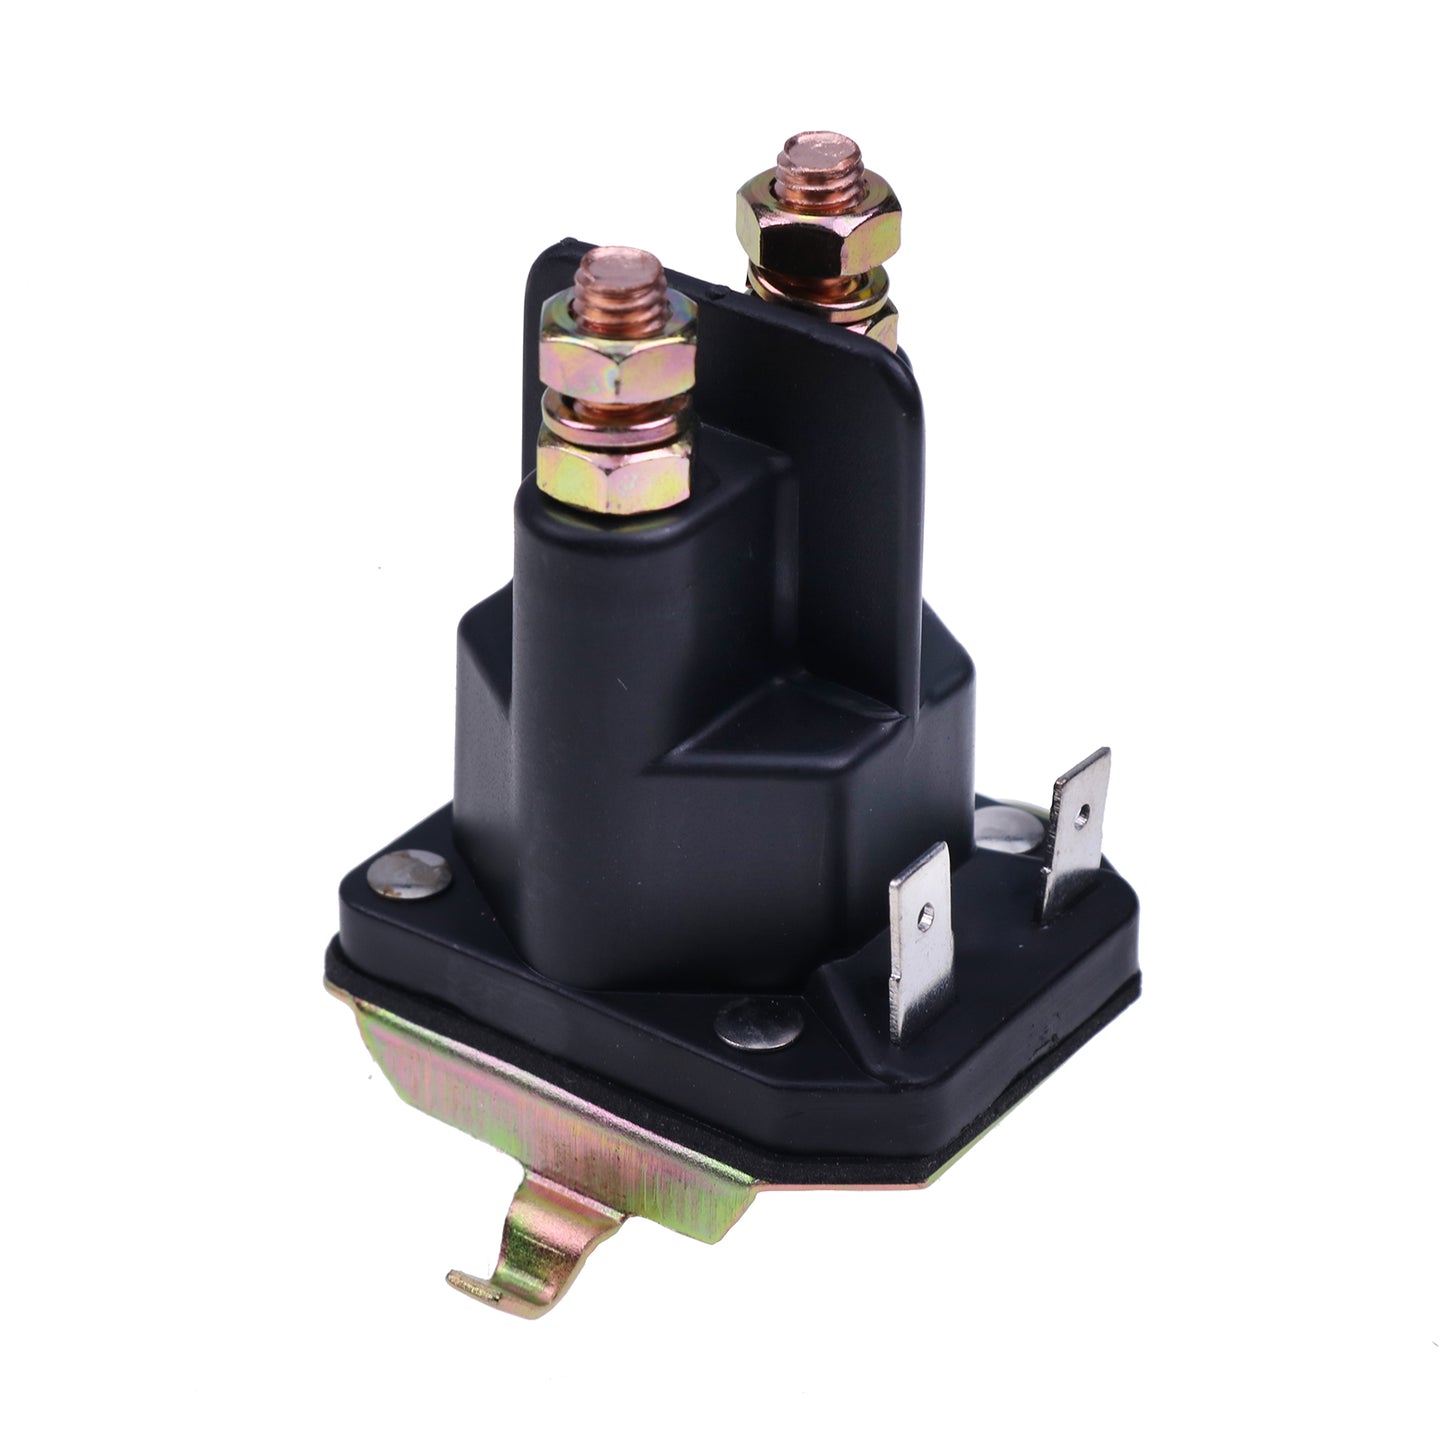 New Lawn Mower Starter Solenoid Relay Compatible with Cub Cadet 192507 532192507 Husqvarna 582042801 582042802 AYP Craftsman Tractors